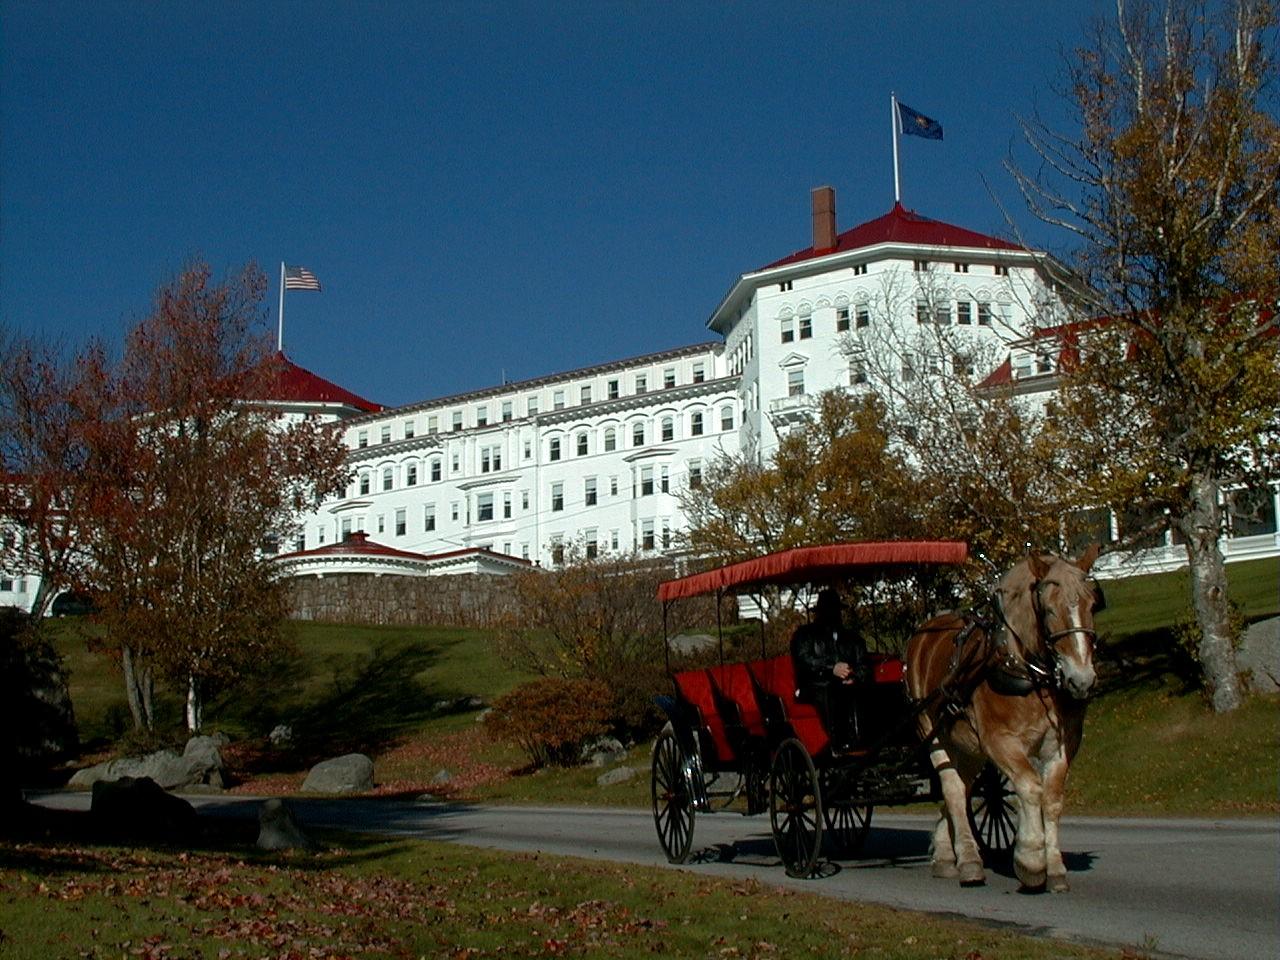 Mt. Washington Hotel (user submitted)